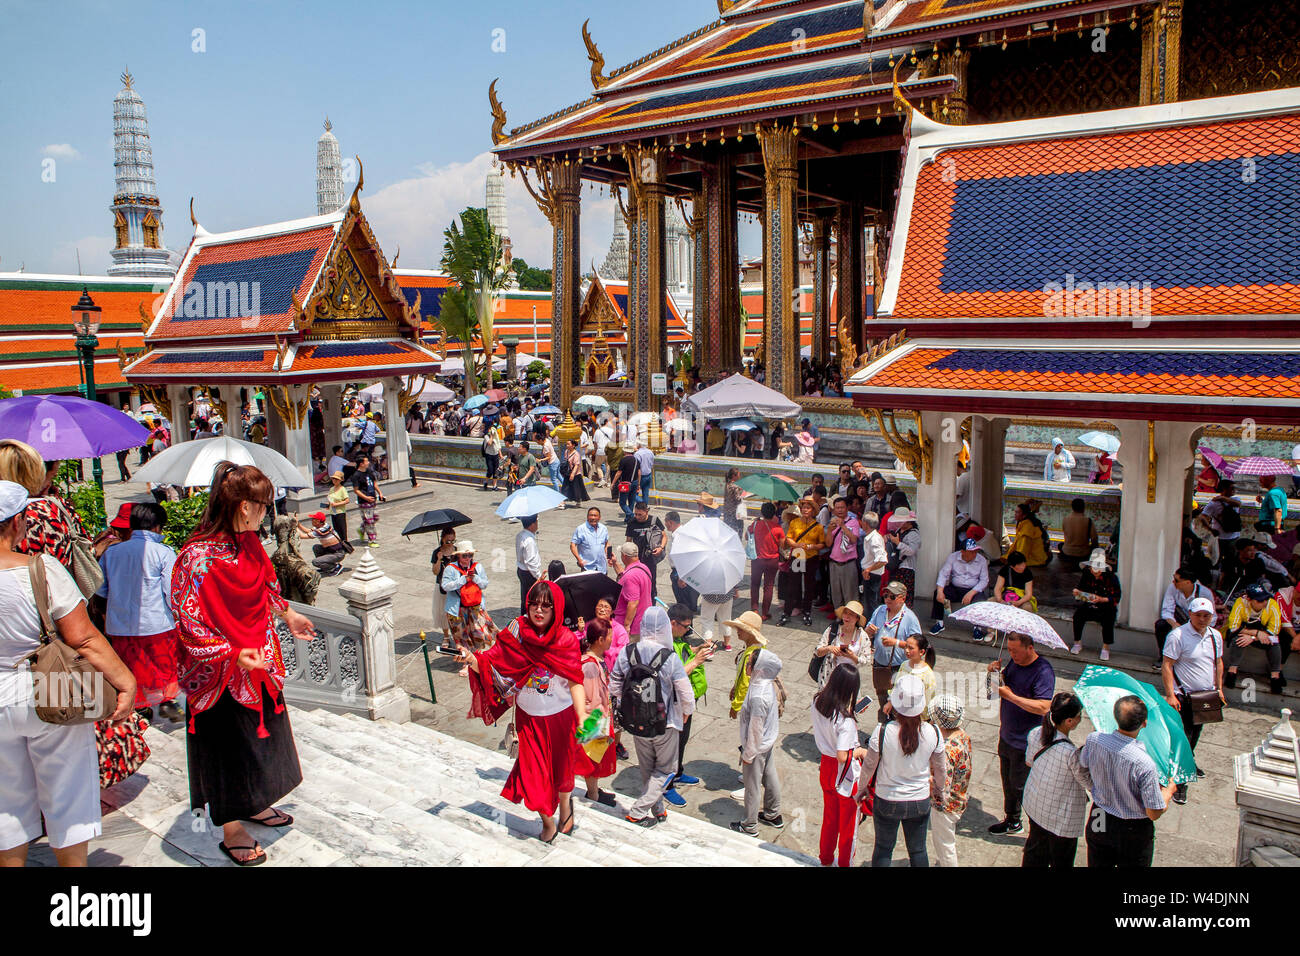 Thousands of tourists swarm the Wat Phra Kaew, Temple of the Emerald Buddha every day in Bangkok, Thailand. Stock Photo